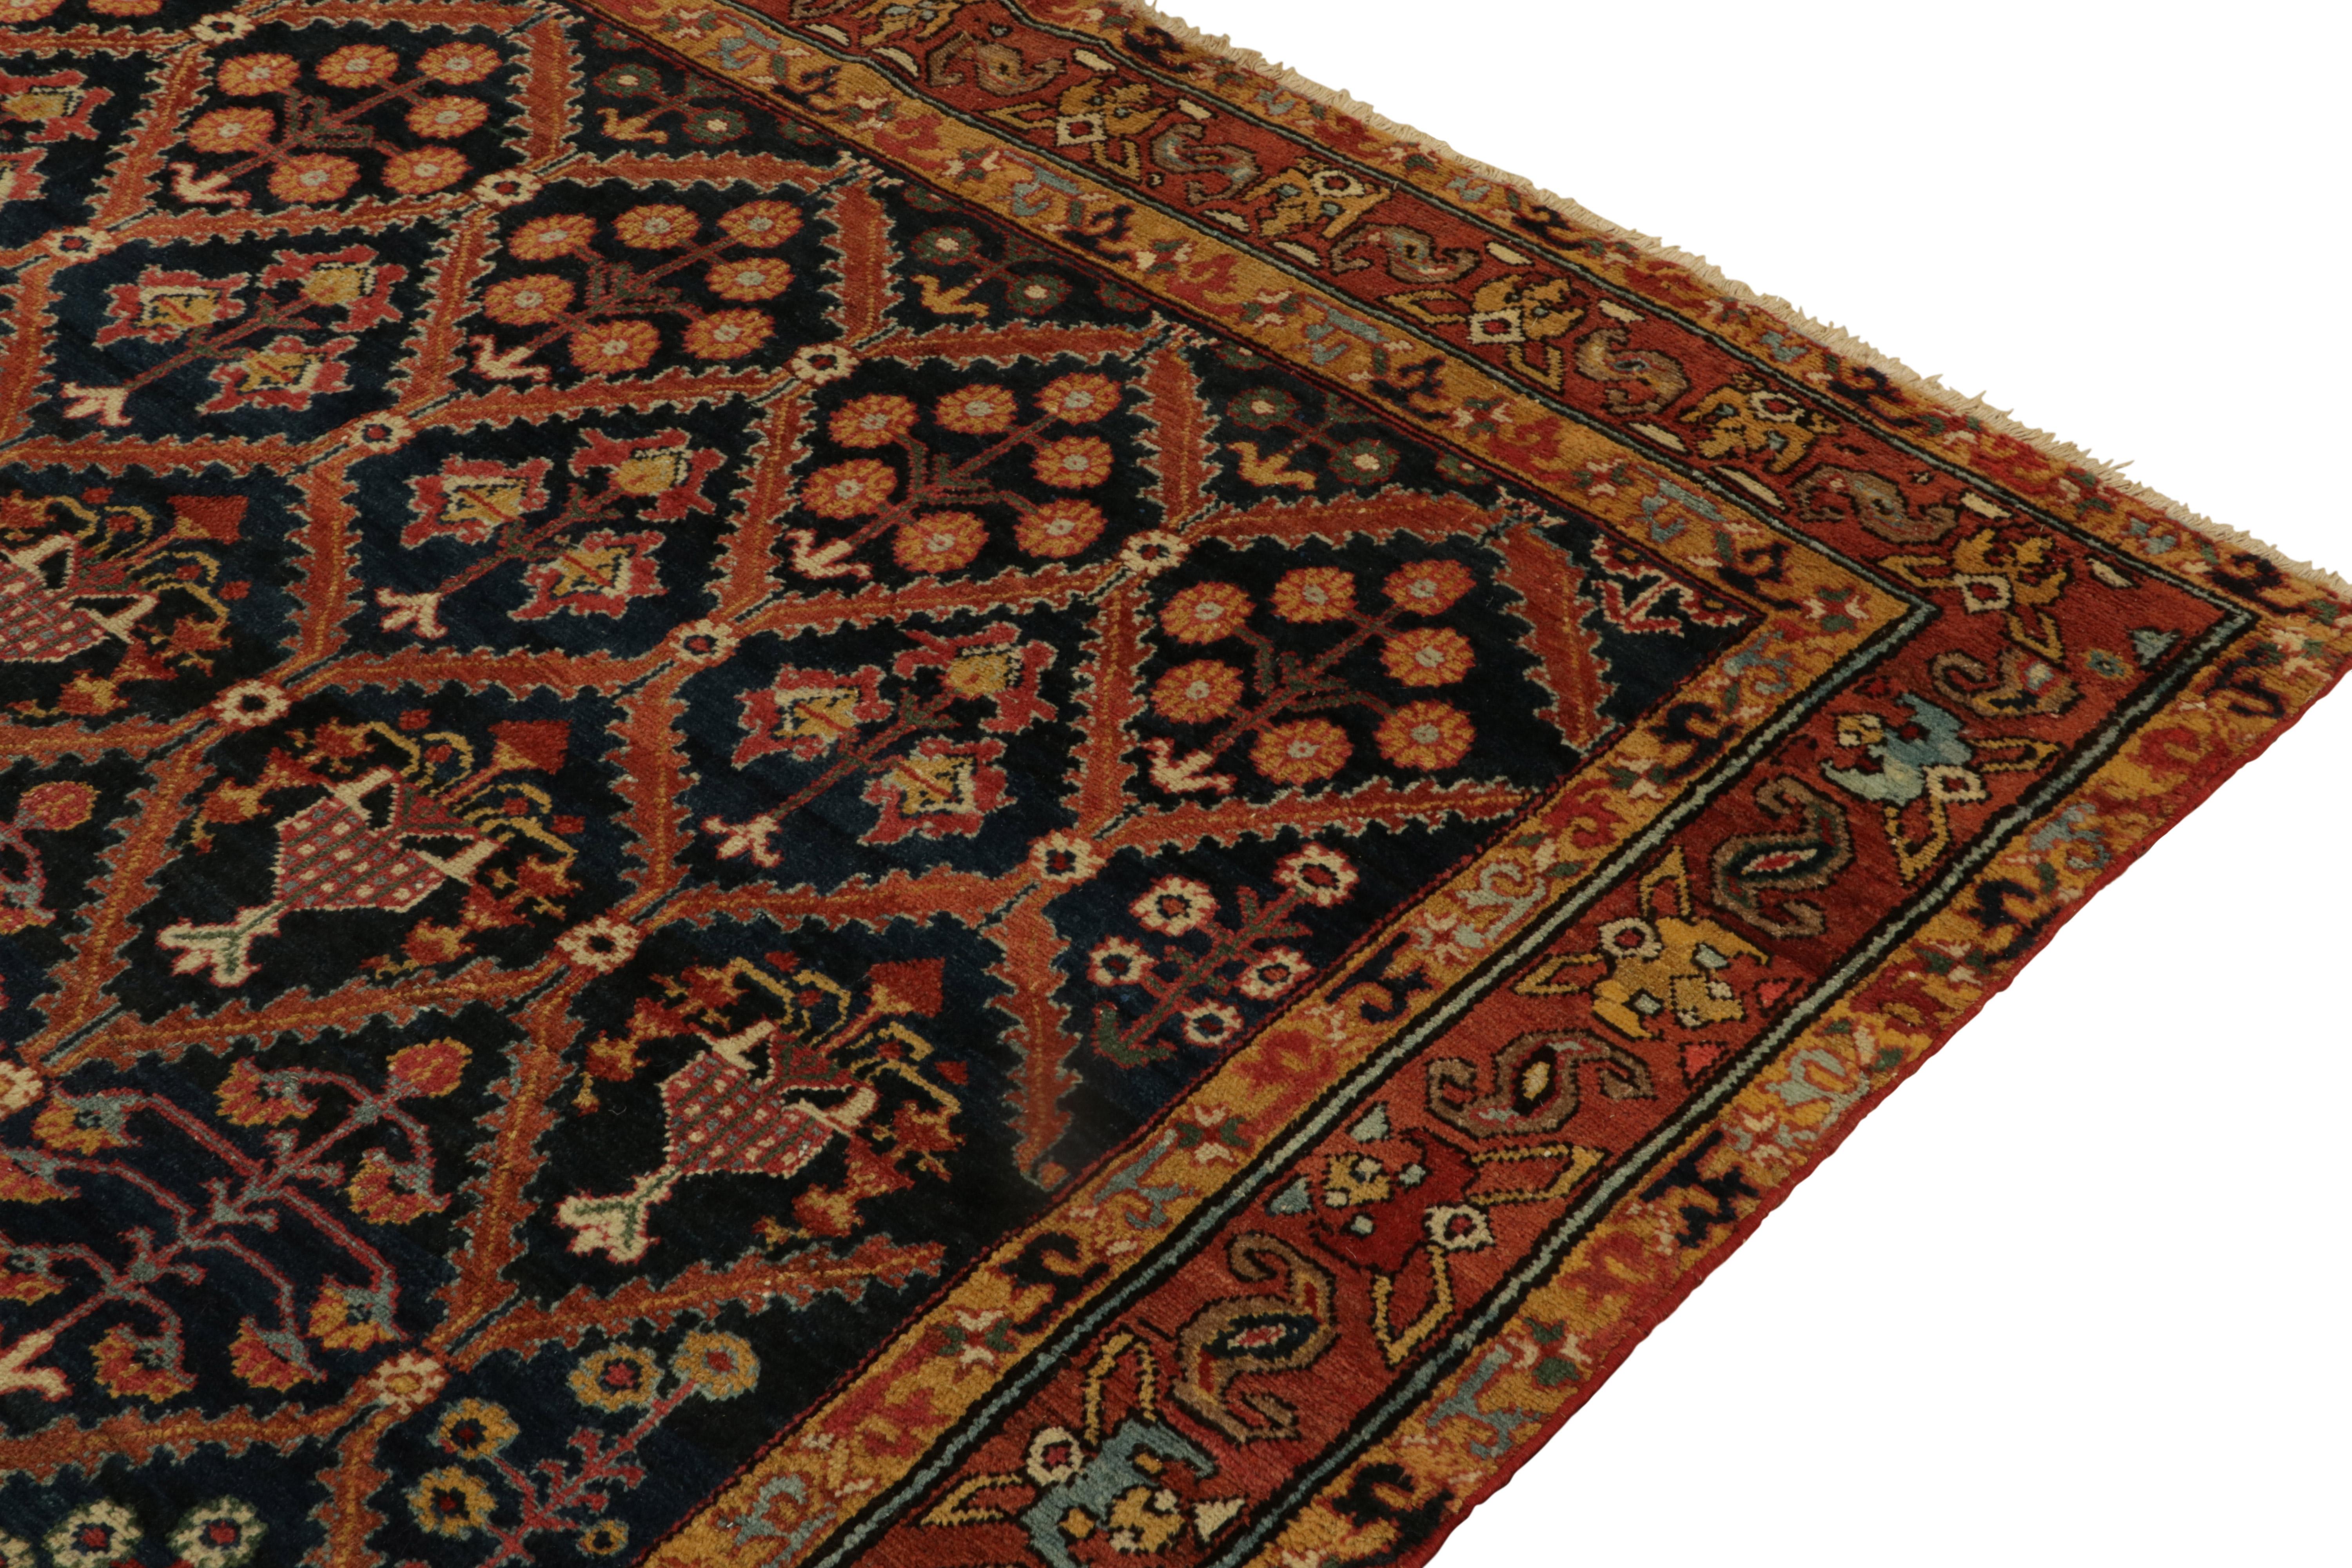 Mid-19th Century Rare Antique Persian Joshaghan rug in Red, Black & Golden-Brown Floral Patterns For Sale